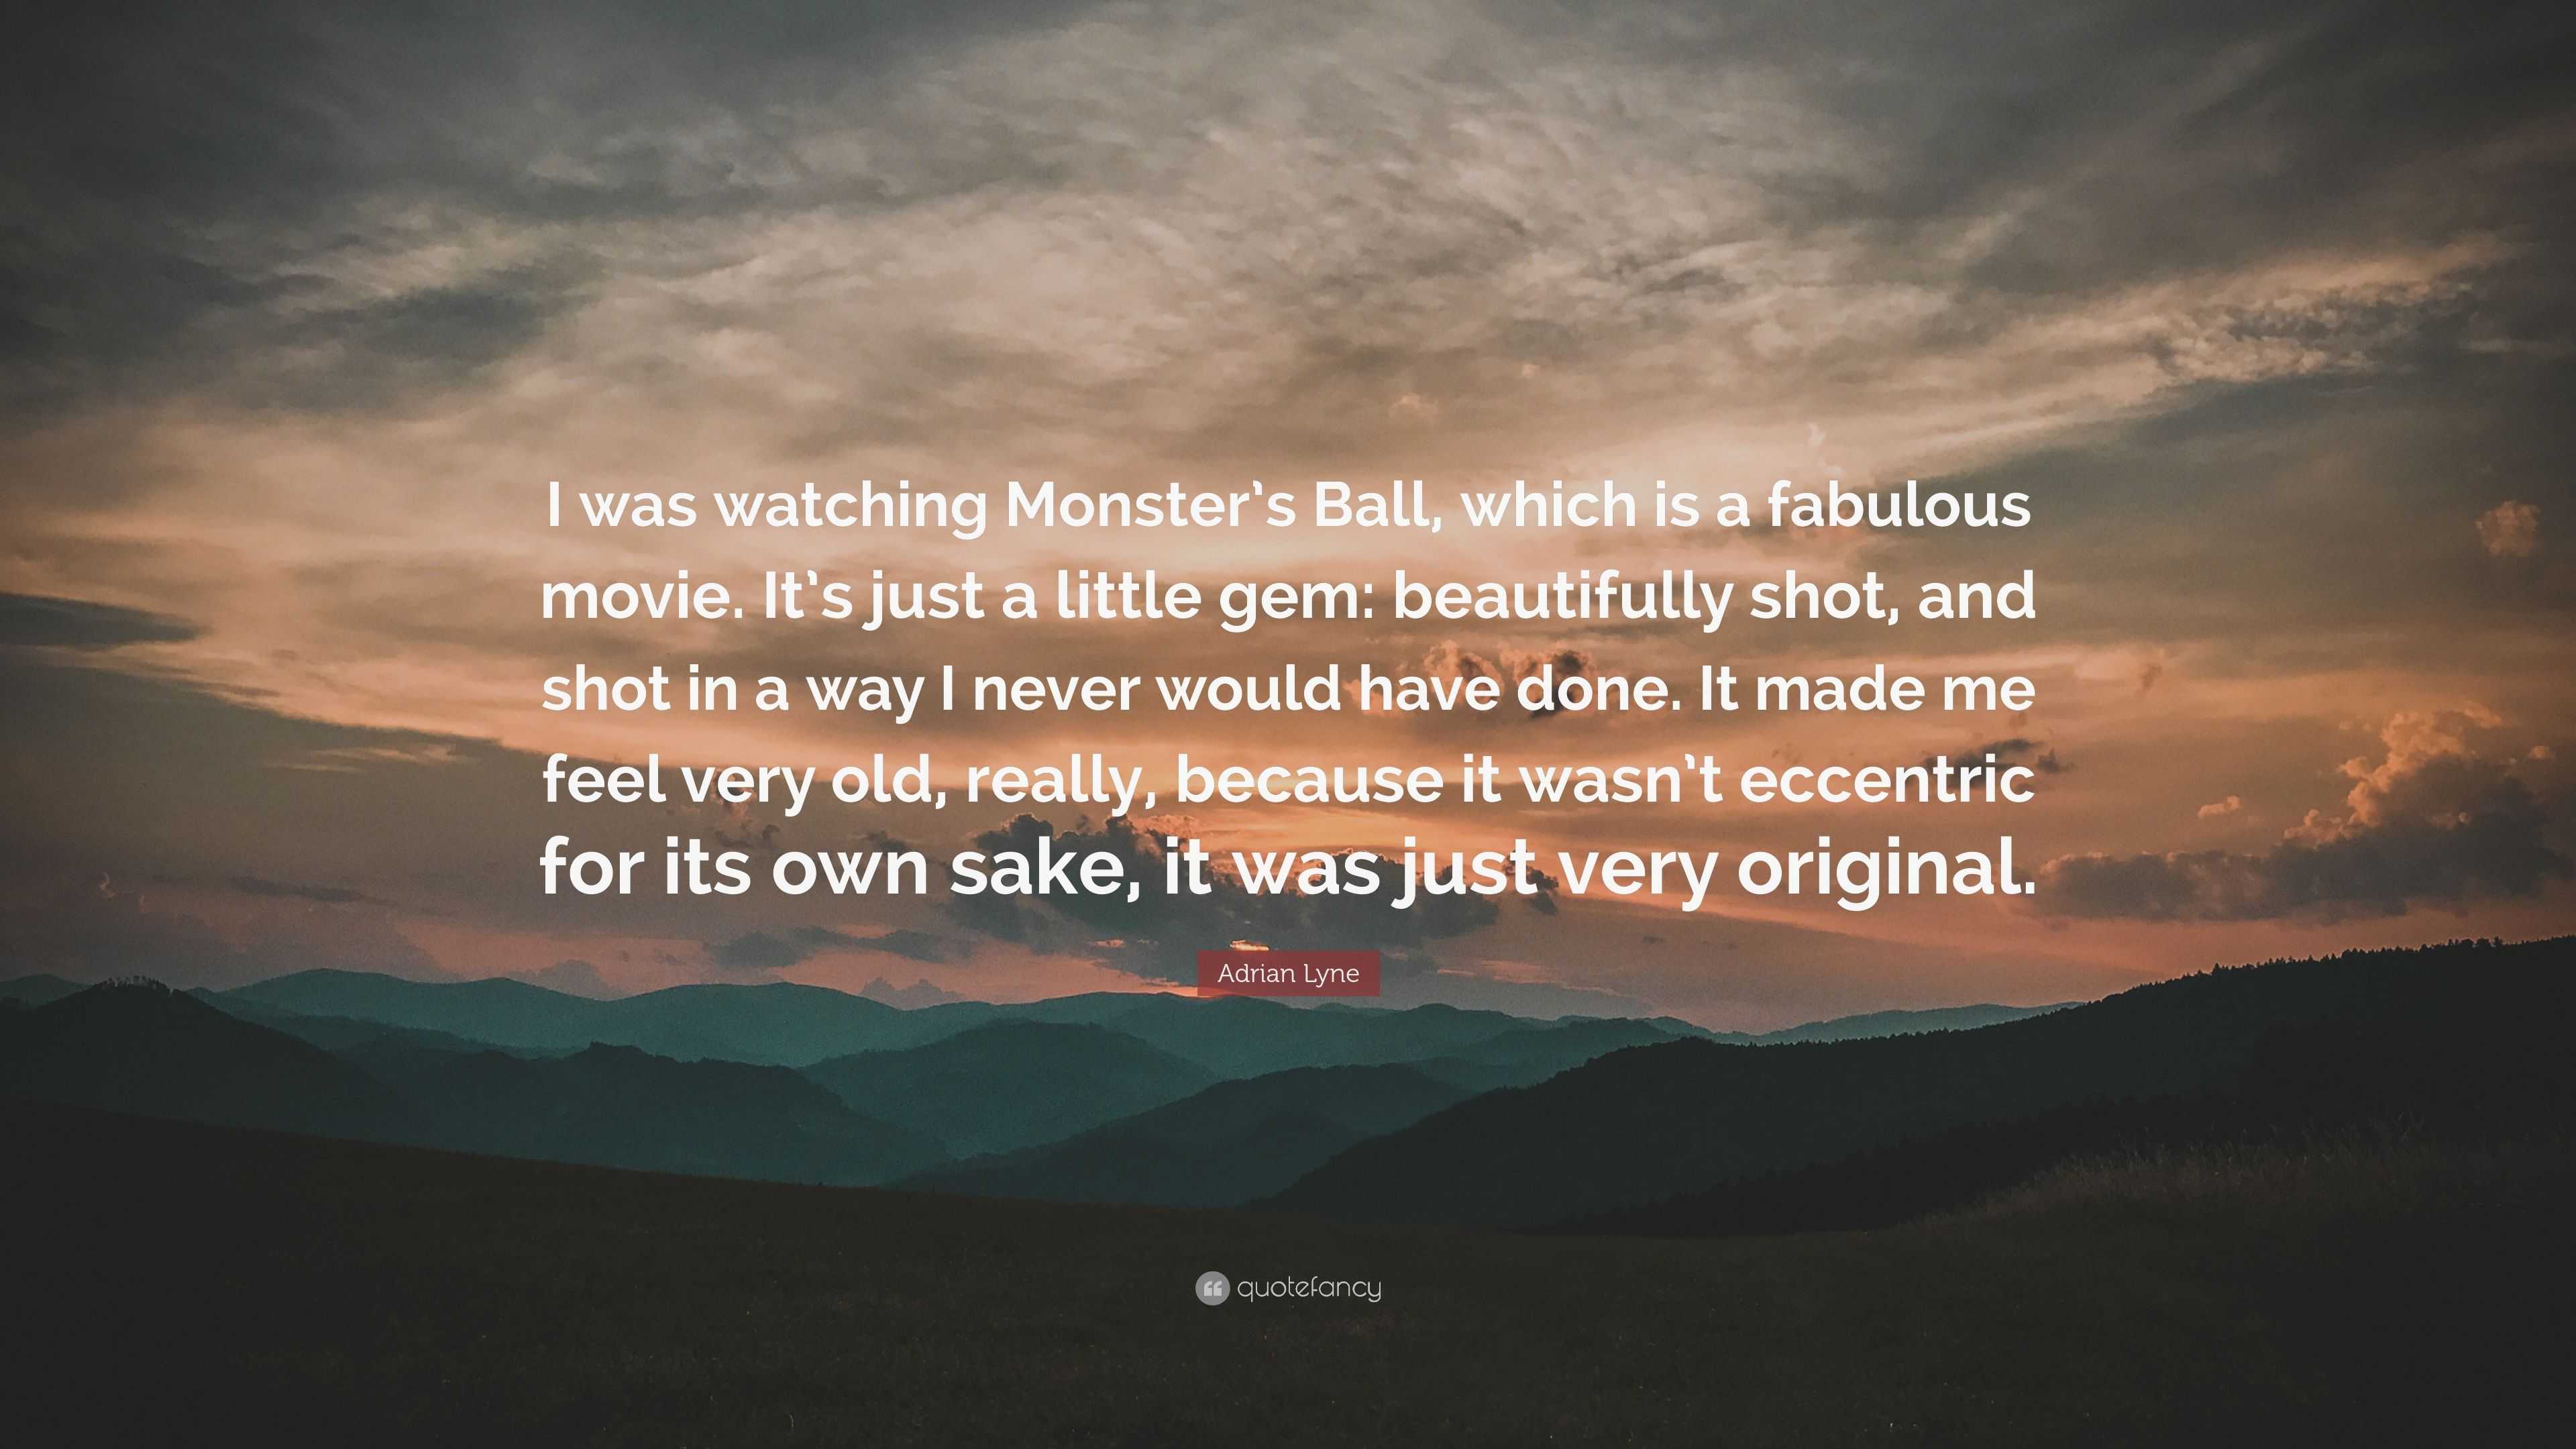 Adrian Lyne Quote: “I Was Watching Monster's Ball, Which Is A Fabulous Movie. It's Just A Little Gem: Beautifully Shot, And Shot In A Way I ...”